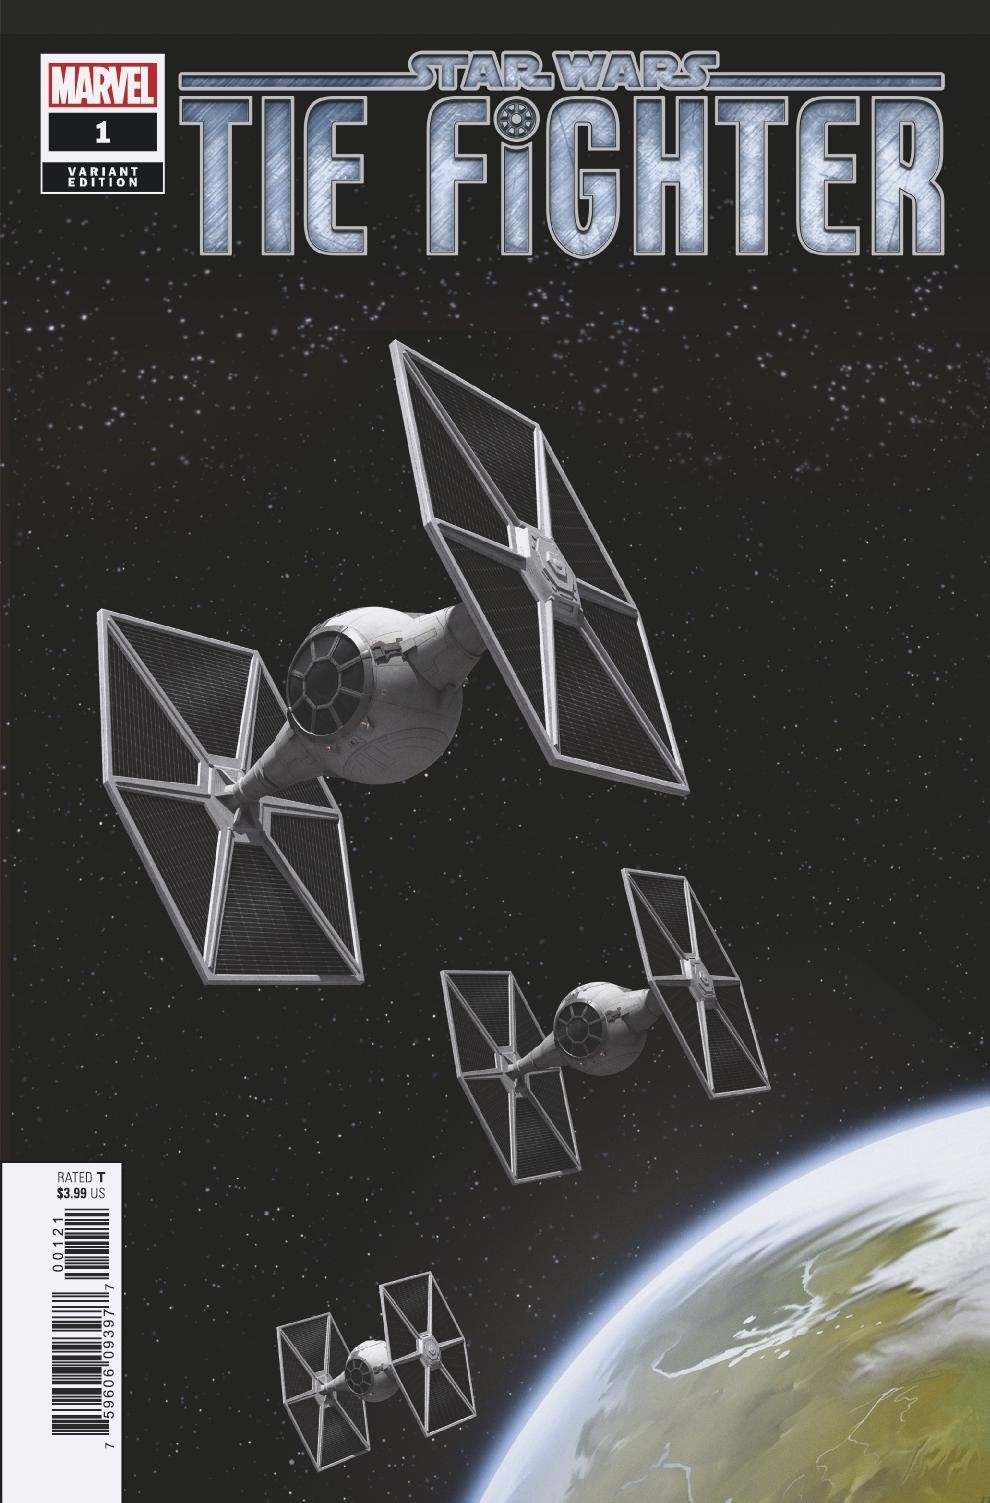 TIE Fighter #1 (Movie Variant Cover) (17.04.2019)